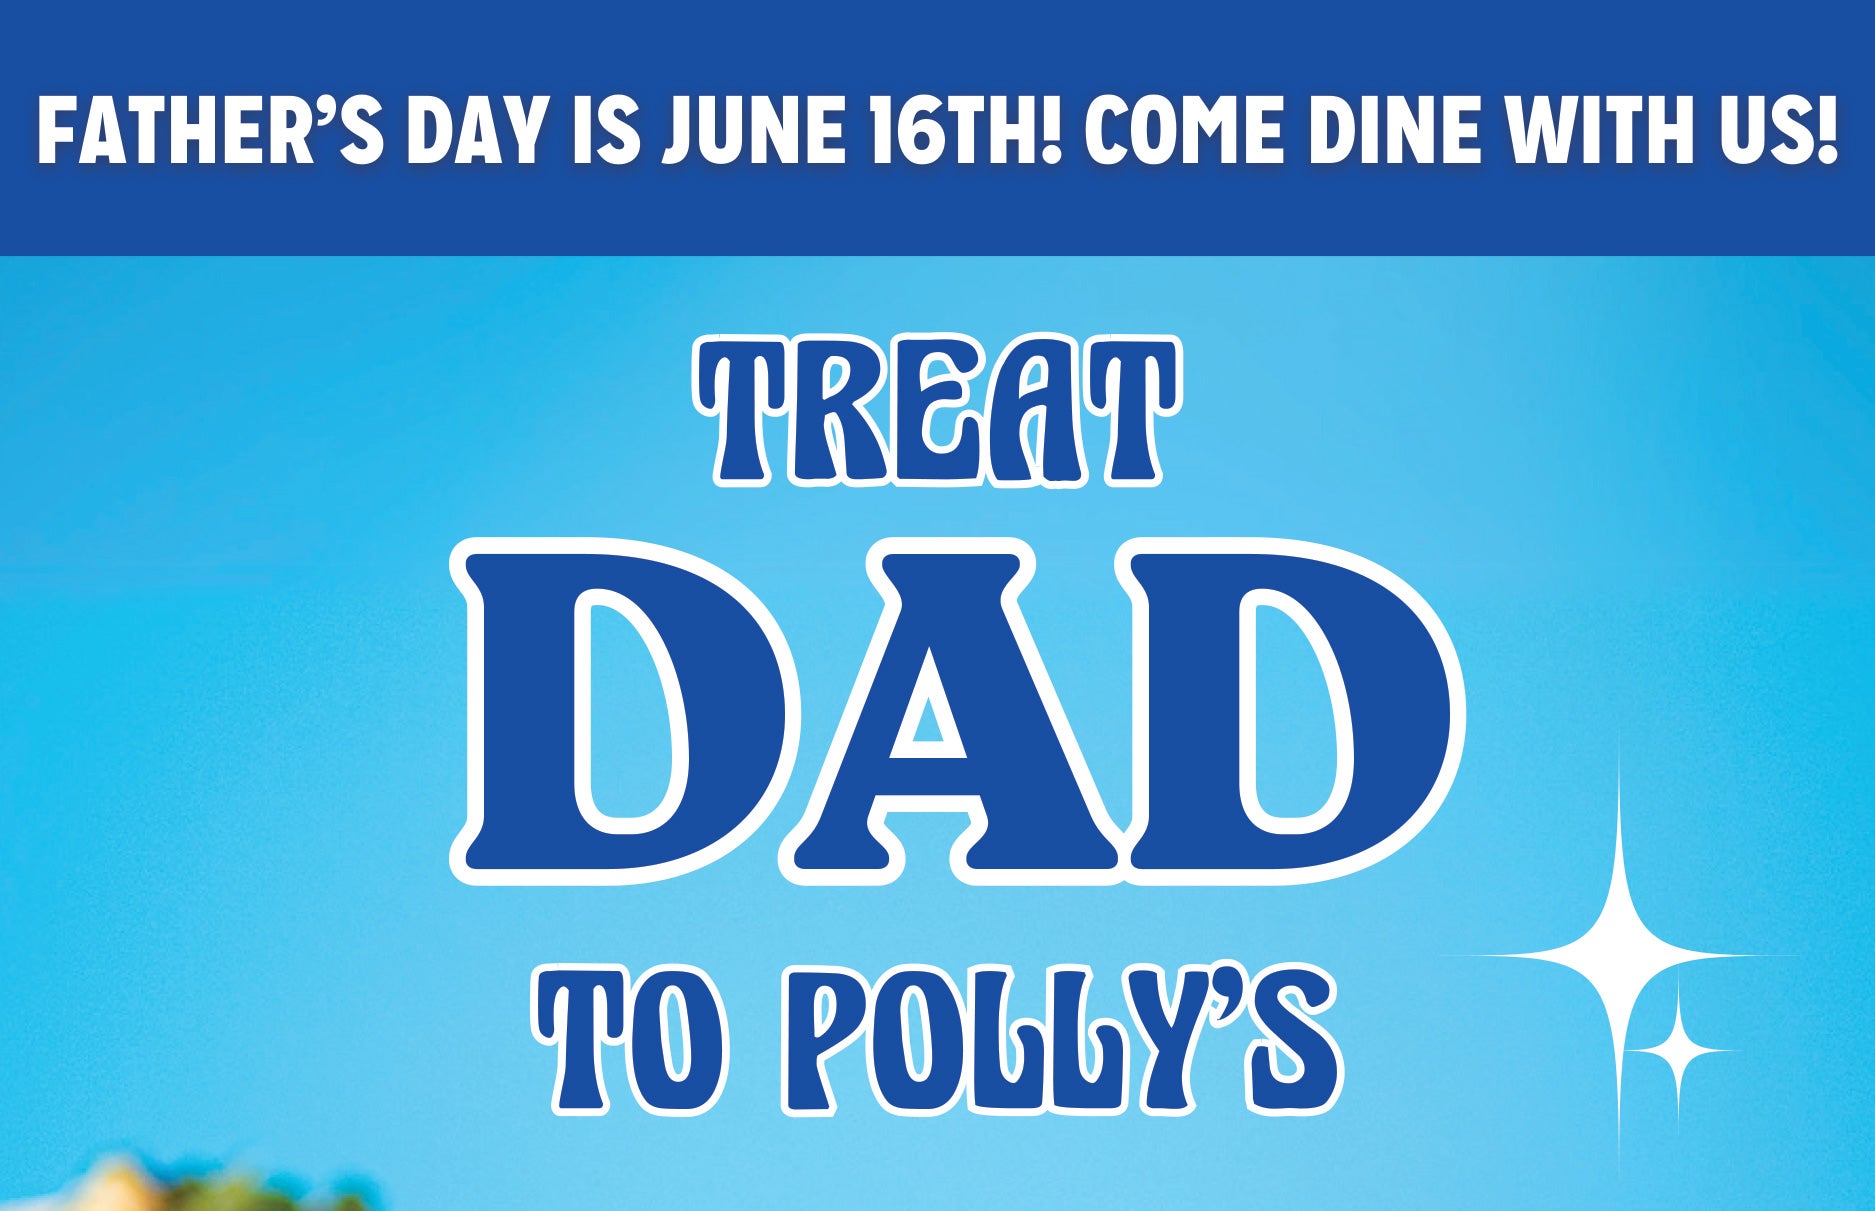 Treat dad to Polly's!